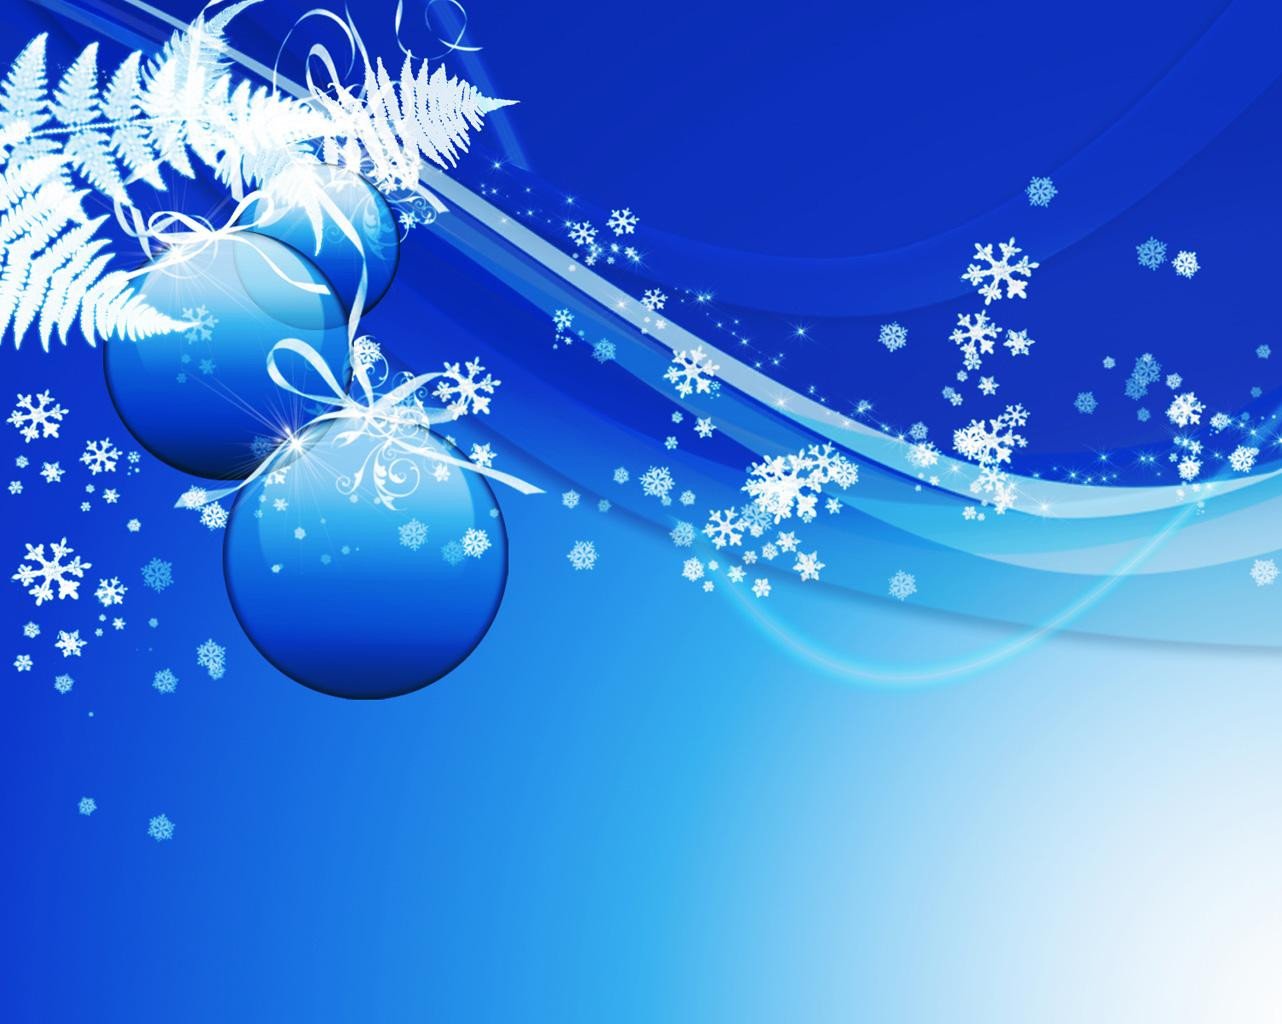 Free Christmas PowerPoint Backgrounds white Christmas